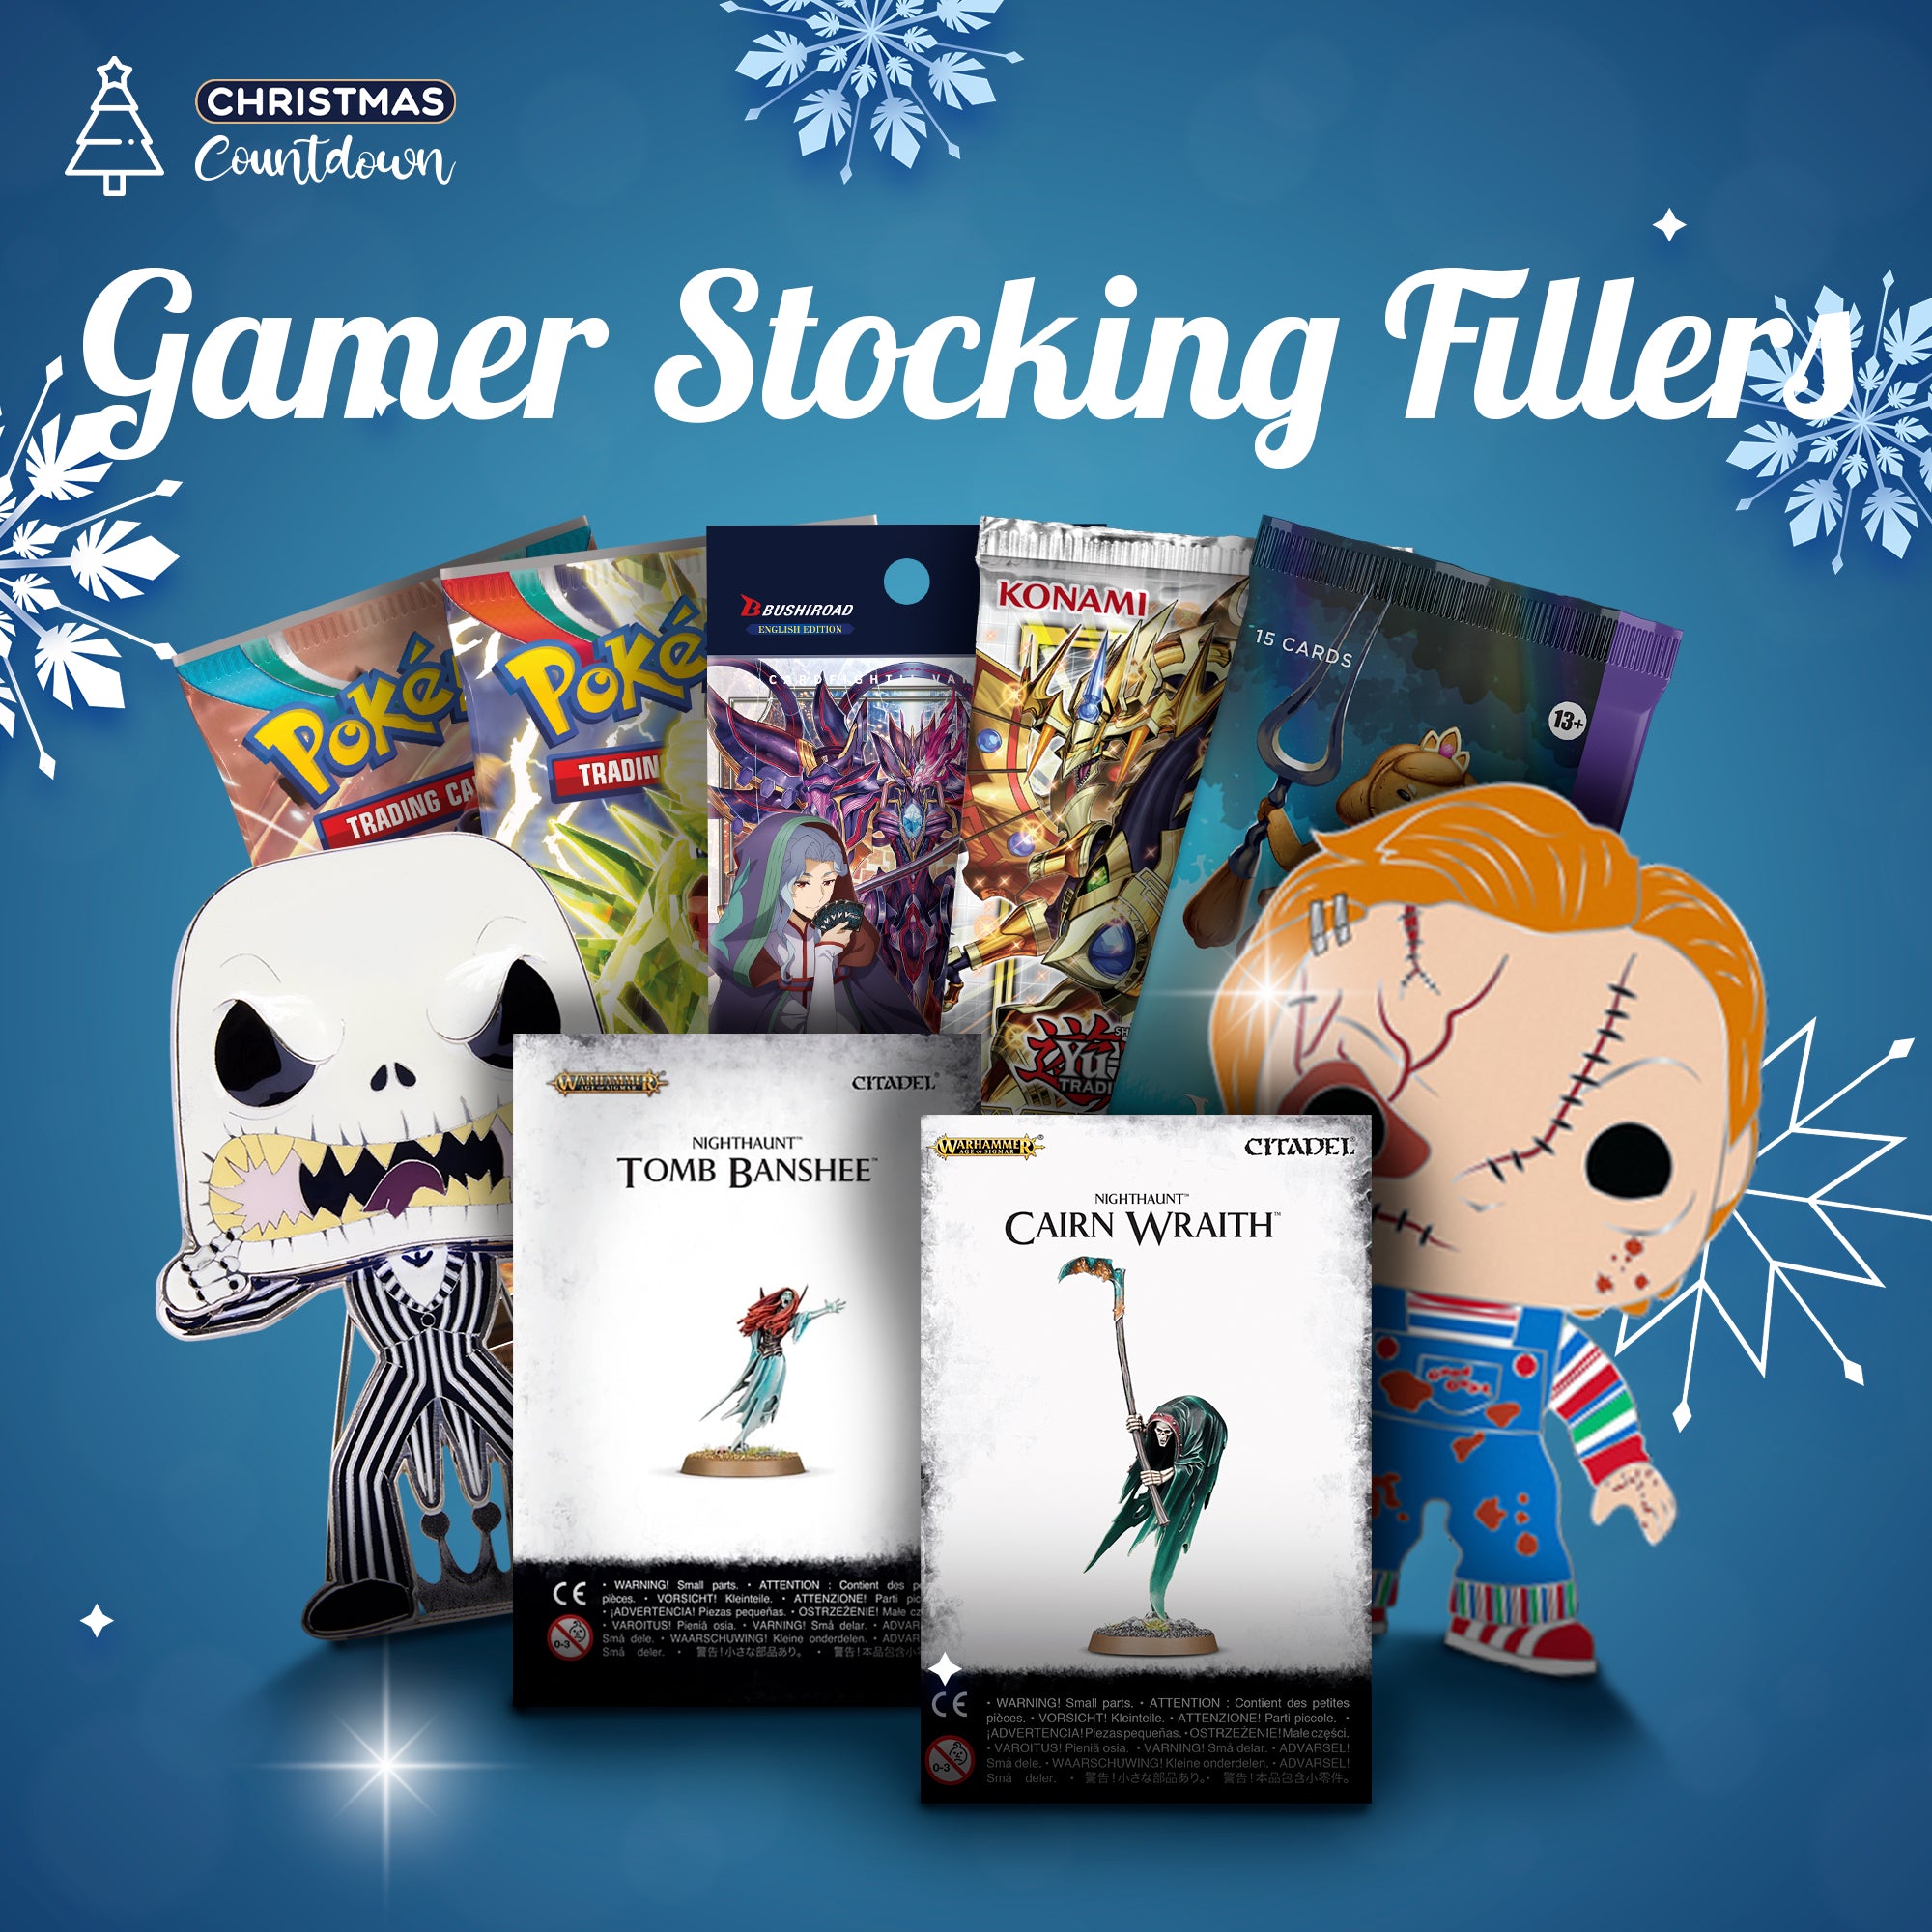 The Best Stocking Fillers for Gamers this Christmas!